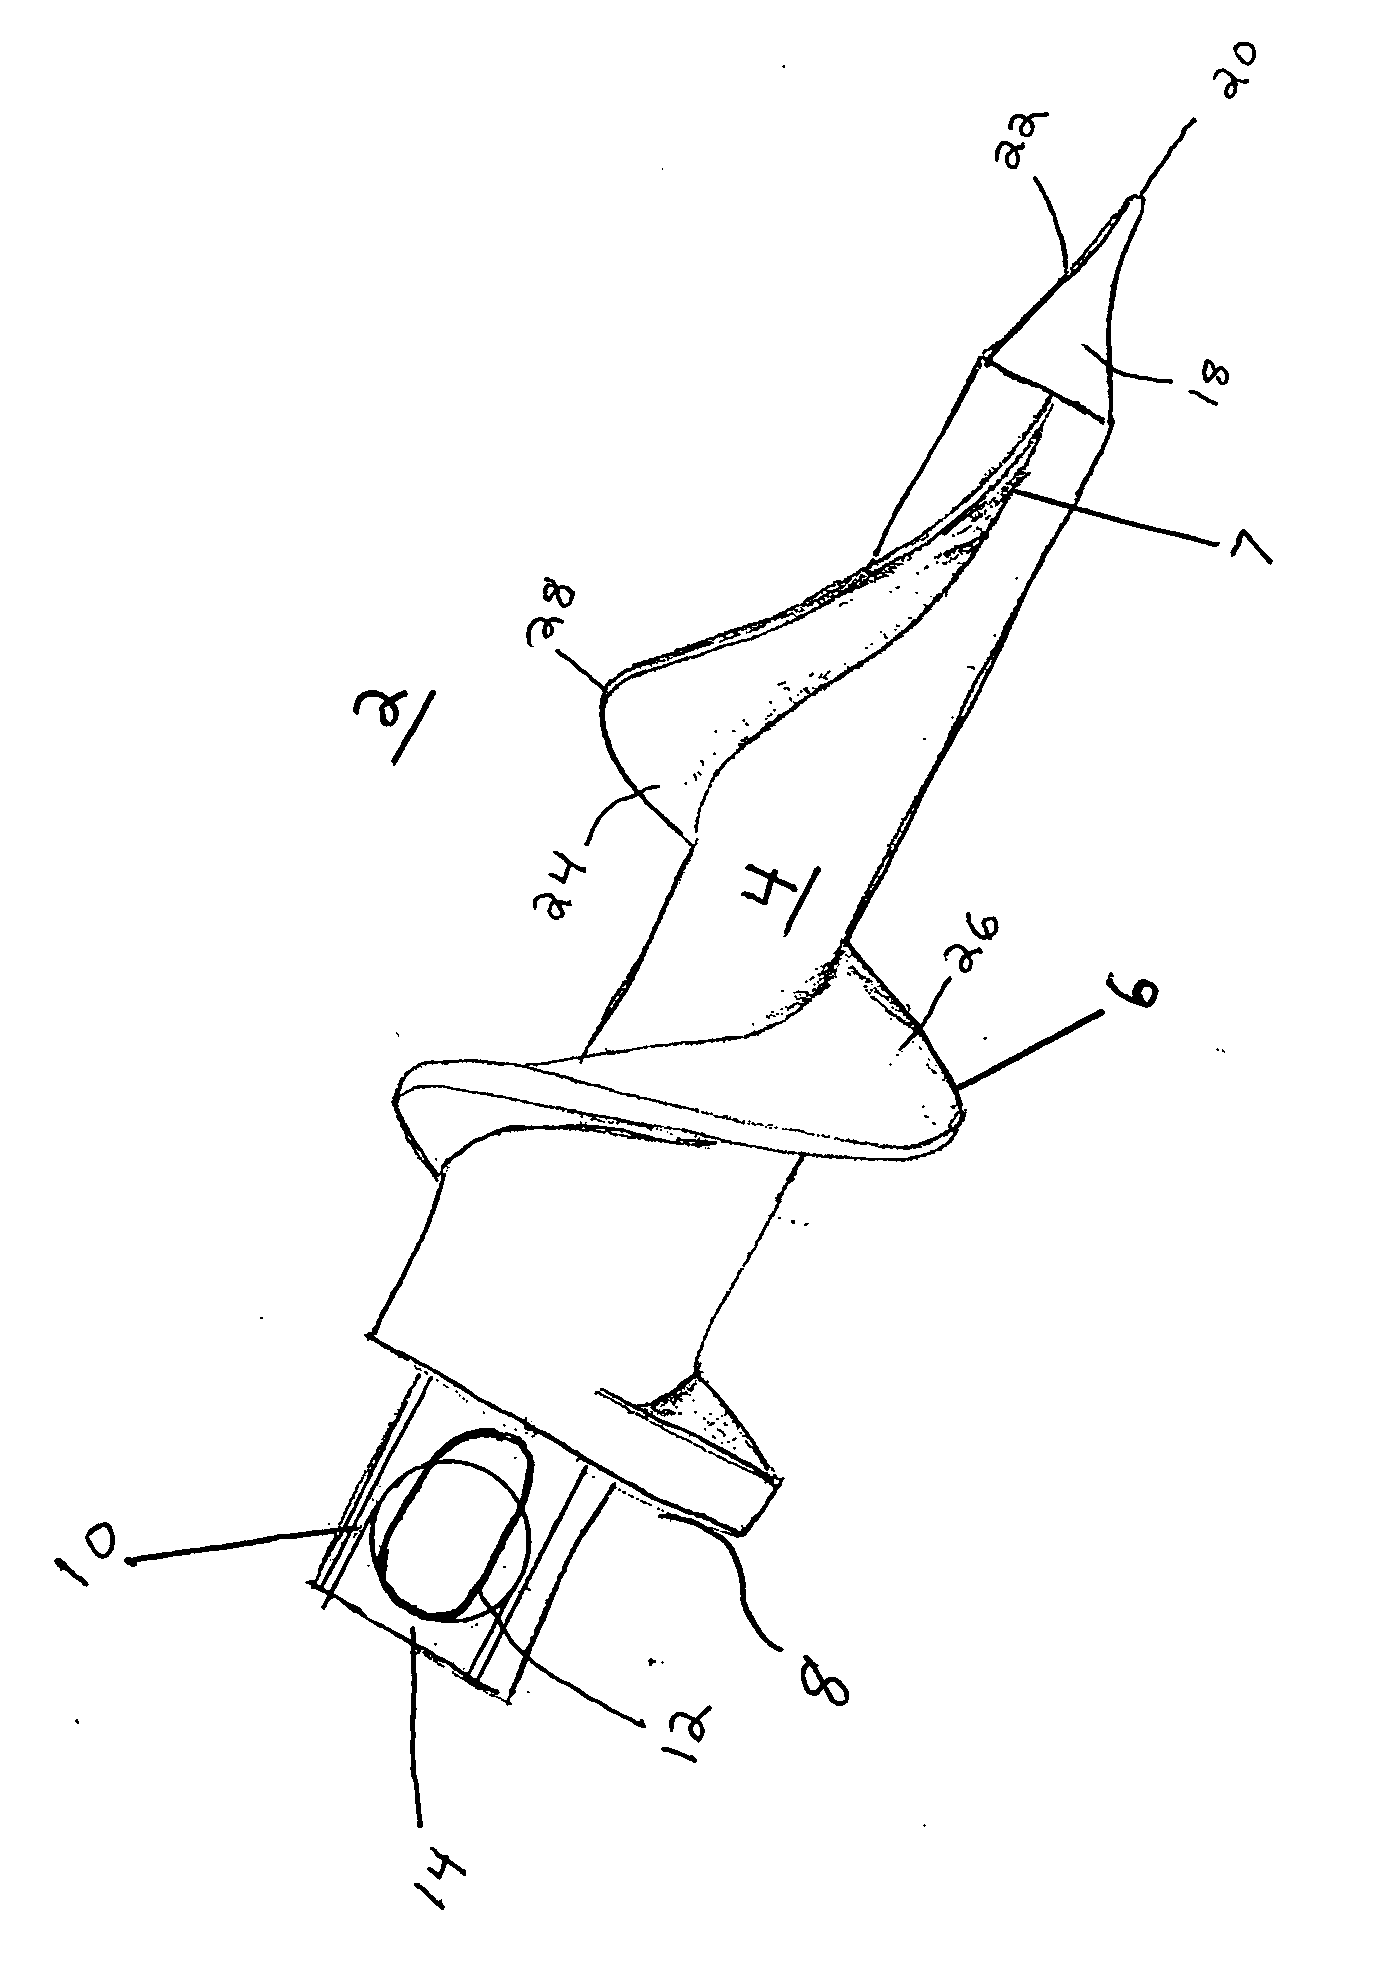 Threaded suture anchor with starting pitch